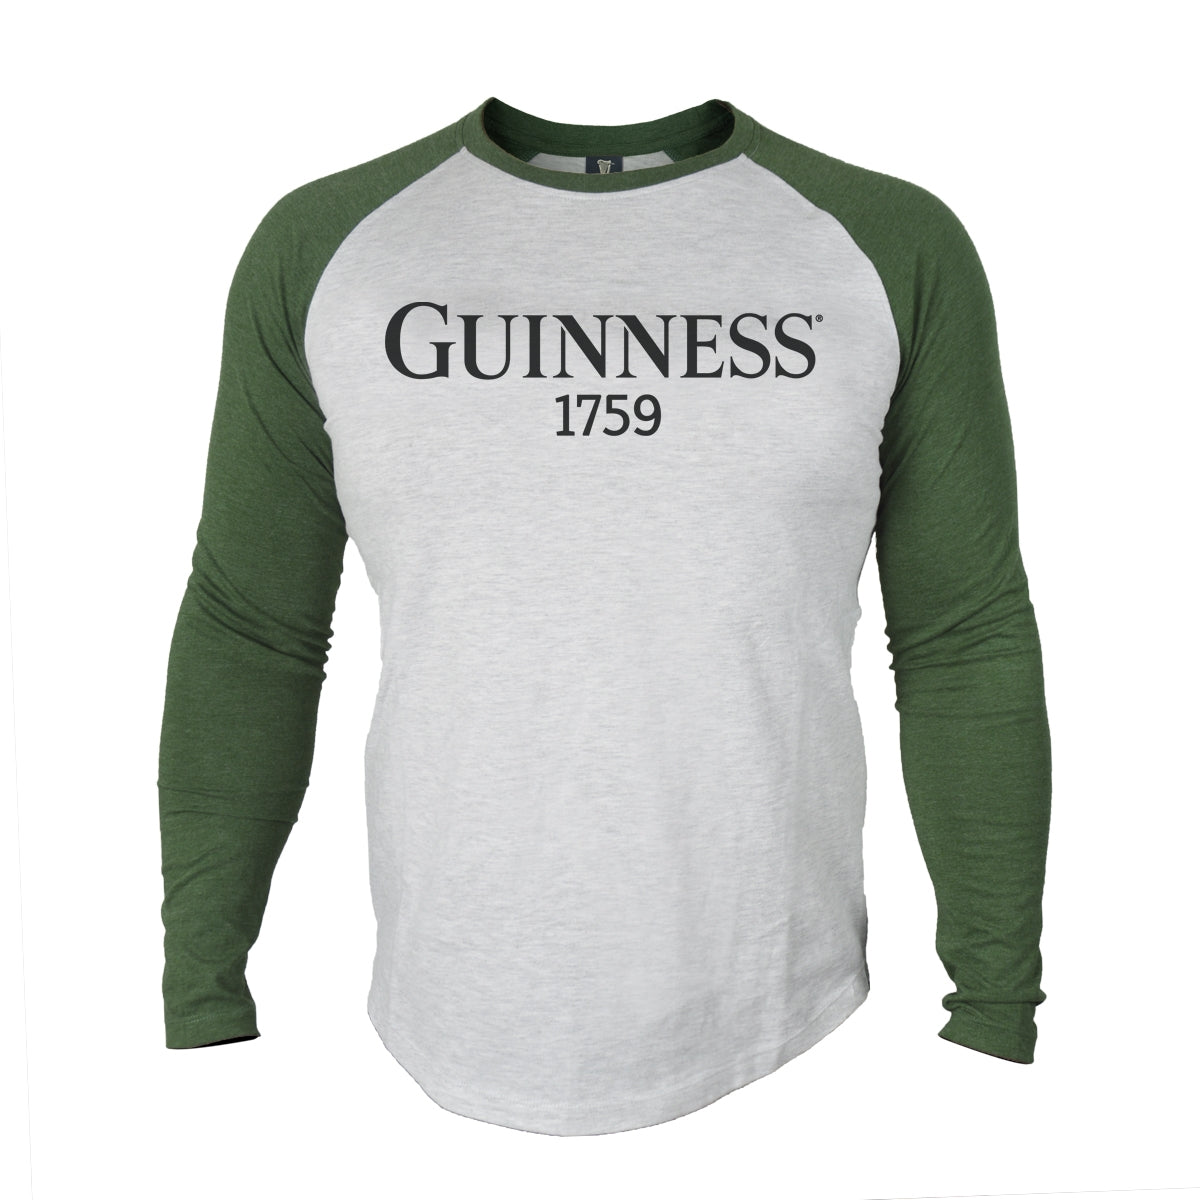 Guinness baseball t-shirt: Guinness Baseball T-Shirt by Guinness.